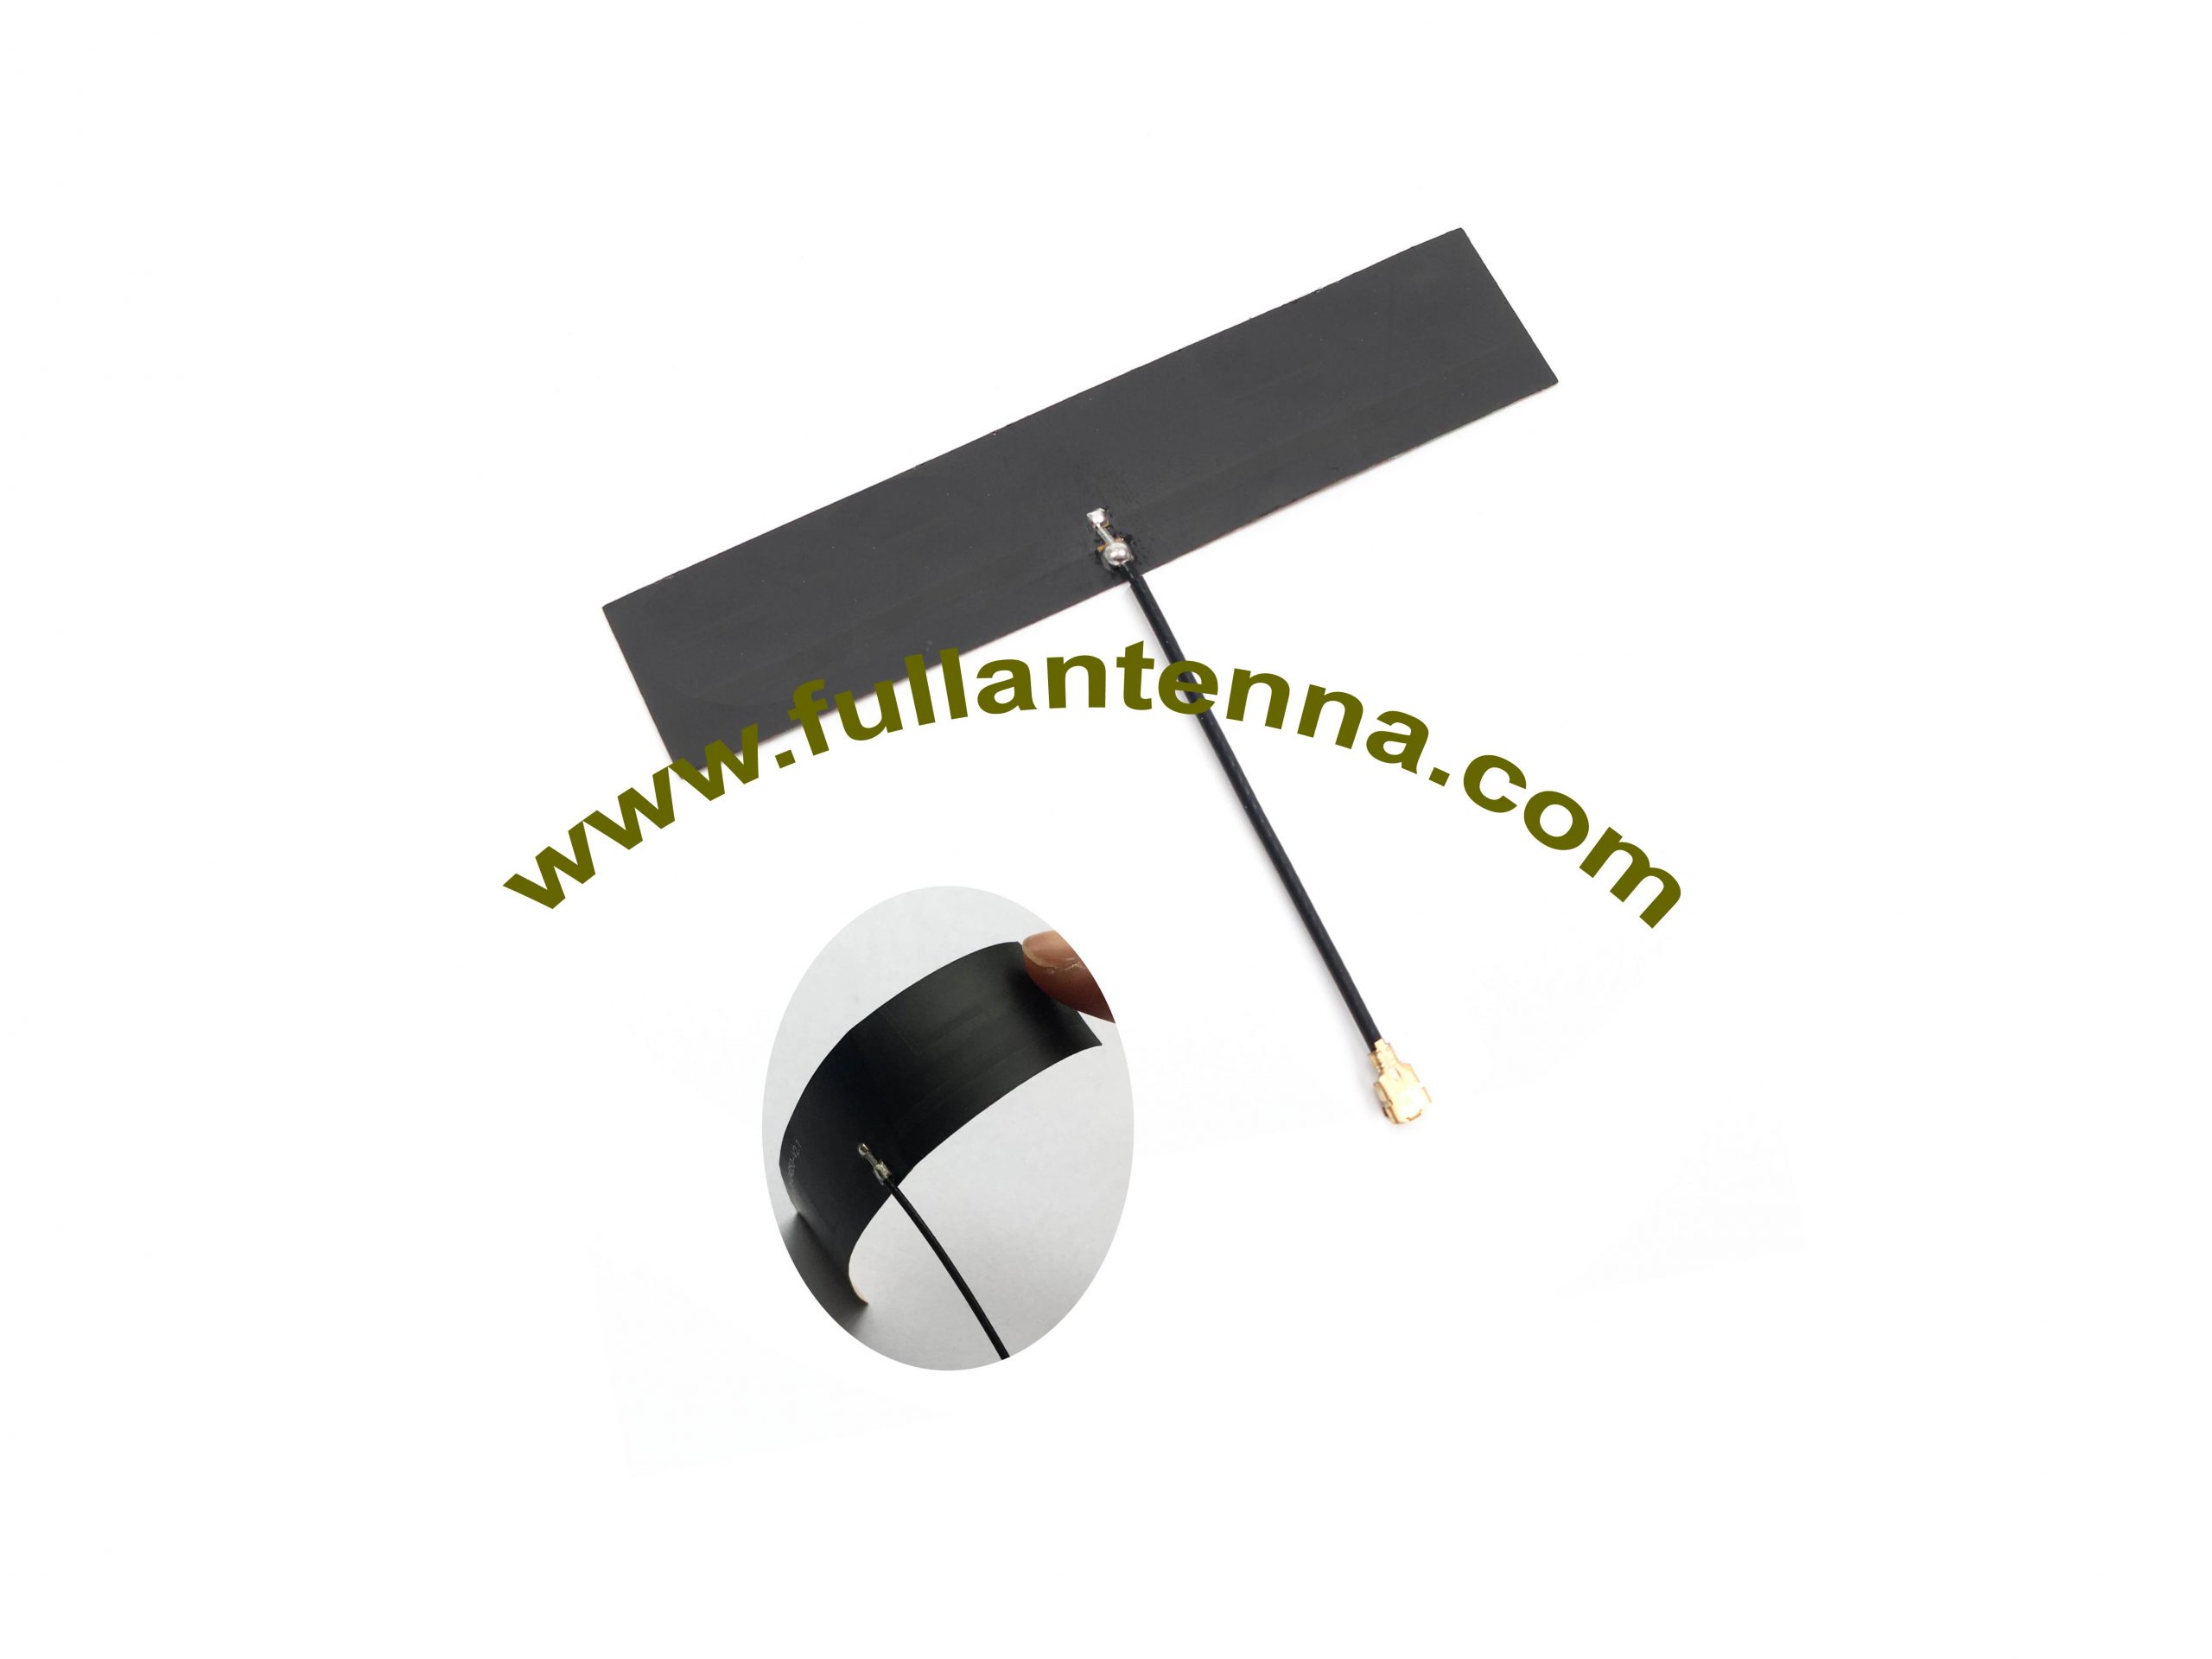 China Manufacturer for Lte Antenna Connector – P/N:FALTEFPCB.01,4G/LTE Built-In Antenna,FPCB 4G inner antenna soft PCB – Fullantenna